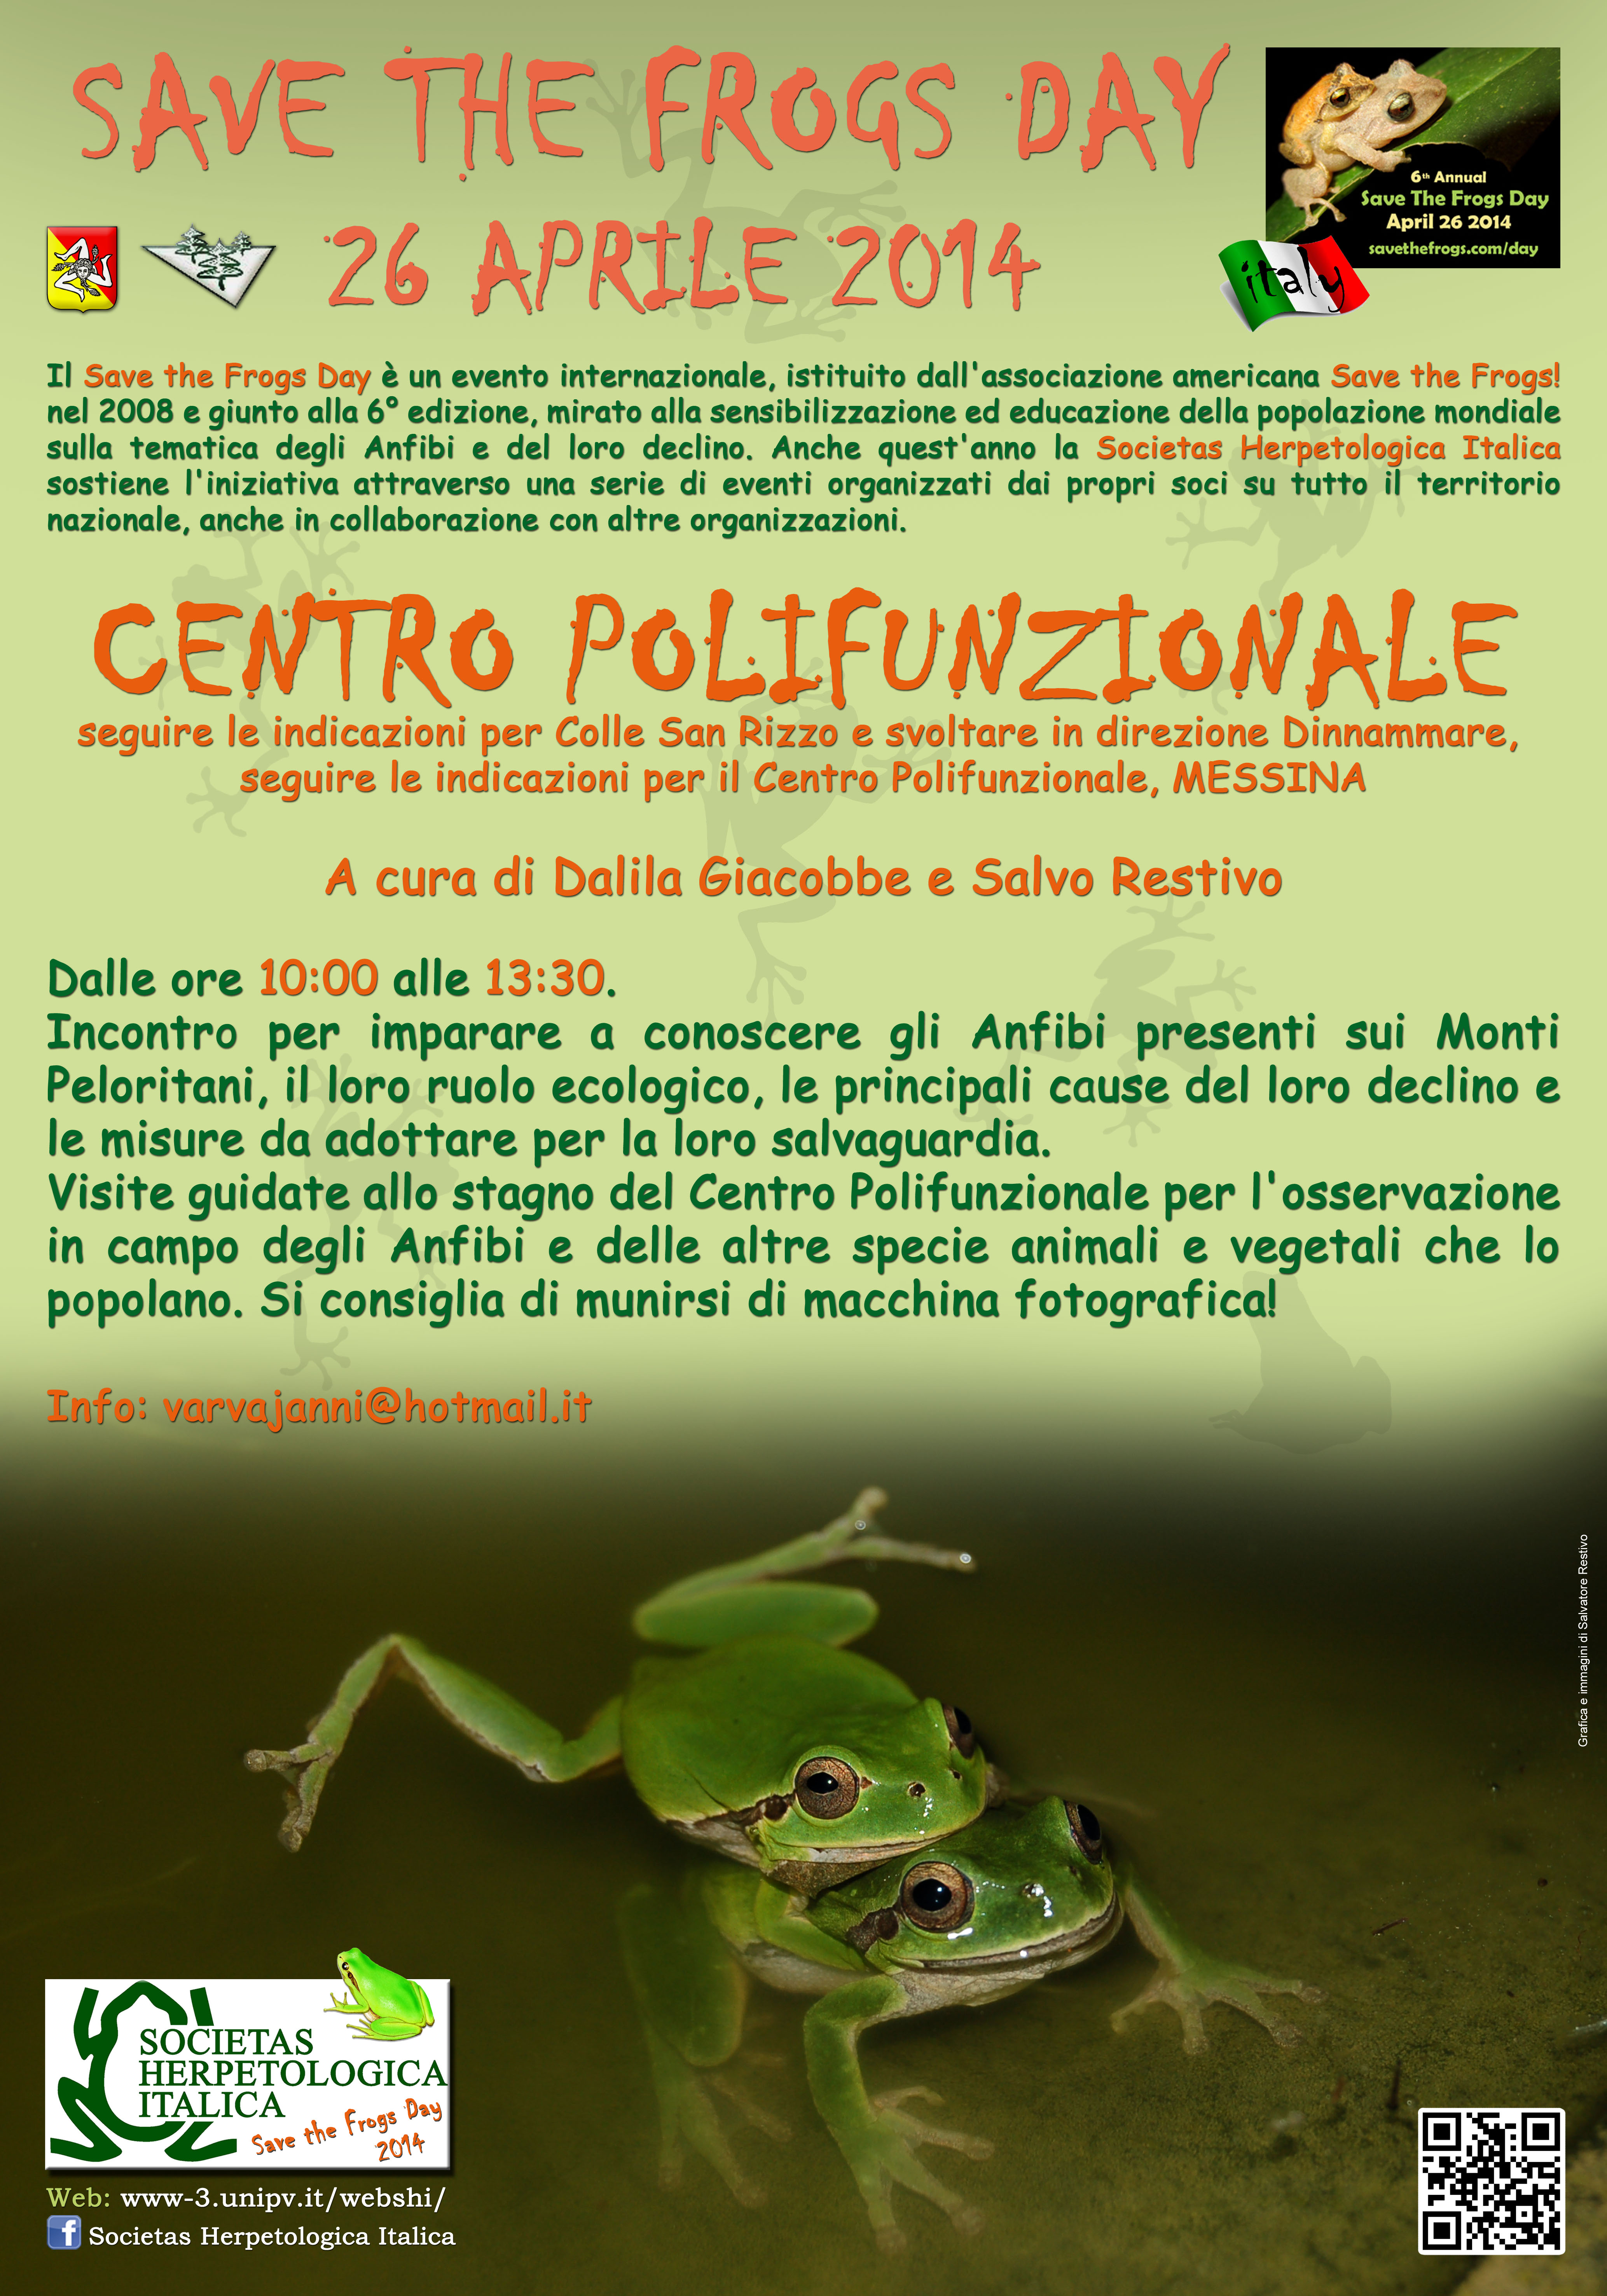 26 aprile 2014 - Save The Frog day